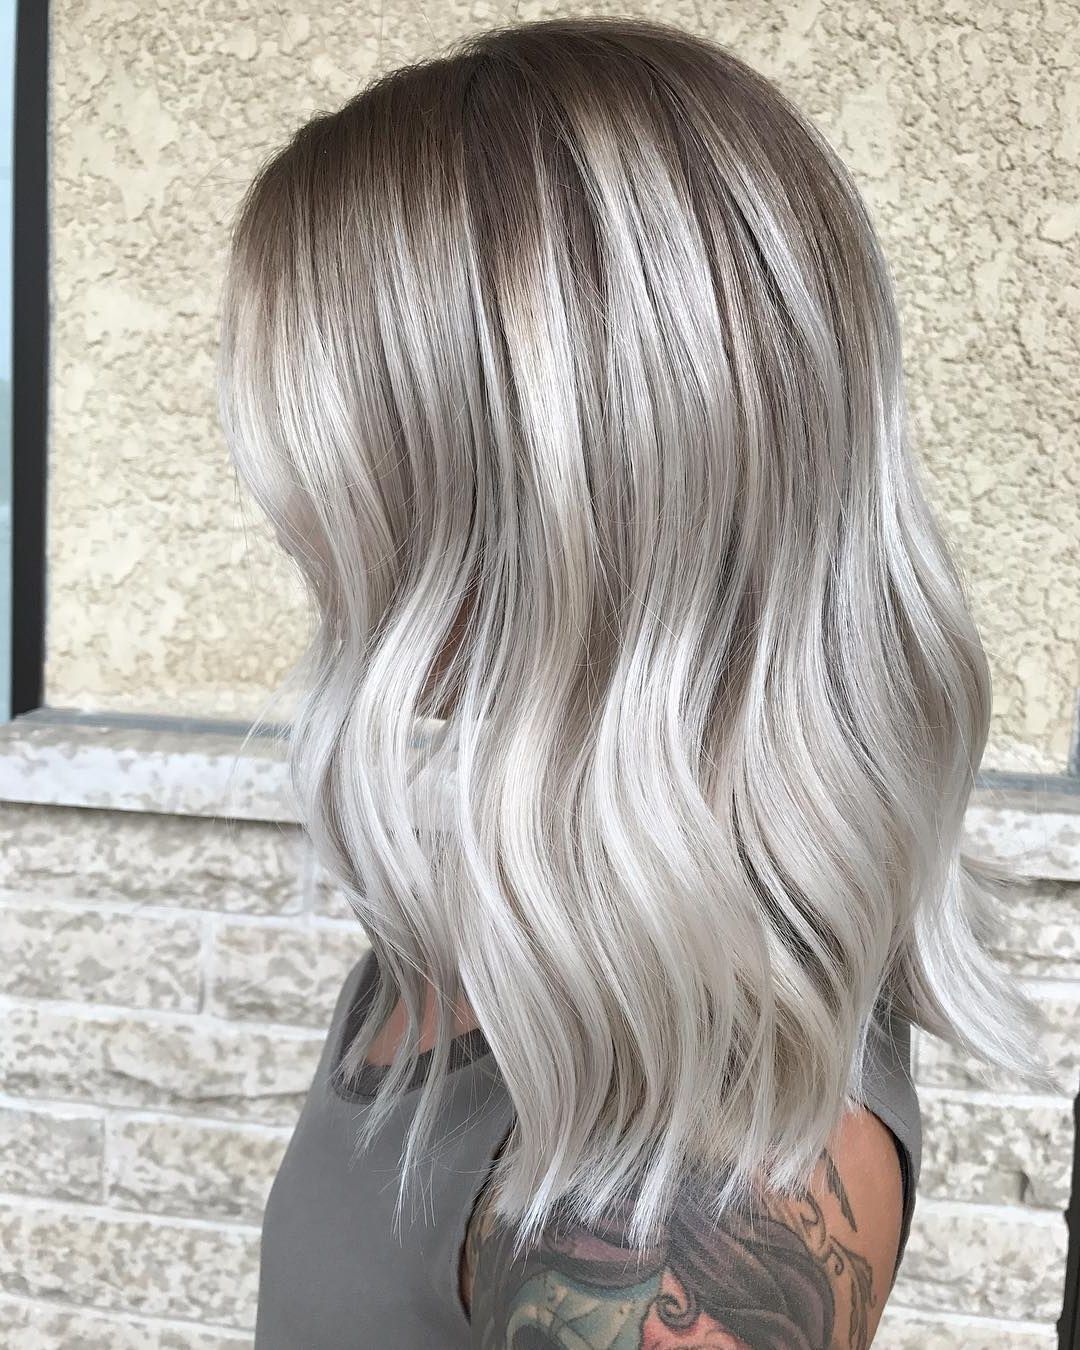 10 Ash Blonde Hairstyles For All Skin Tones, 2018 Best Hair Color Trends Intended For Long Blonde Pixie Haircuts With Root Fade (View 11 of 20)